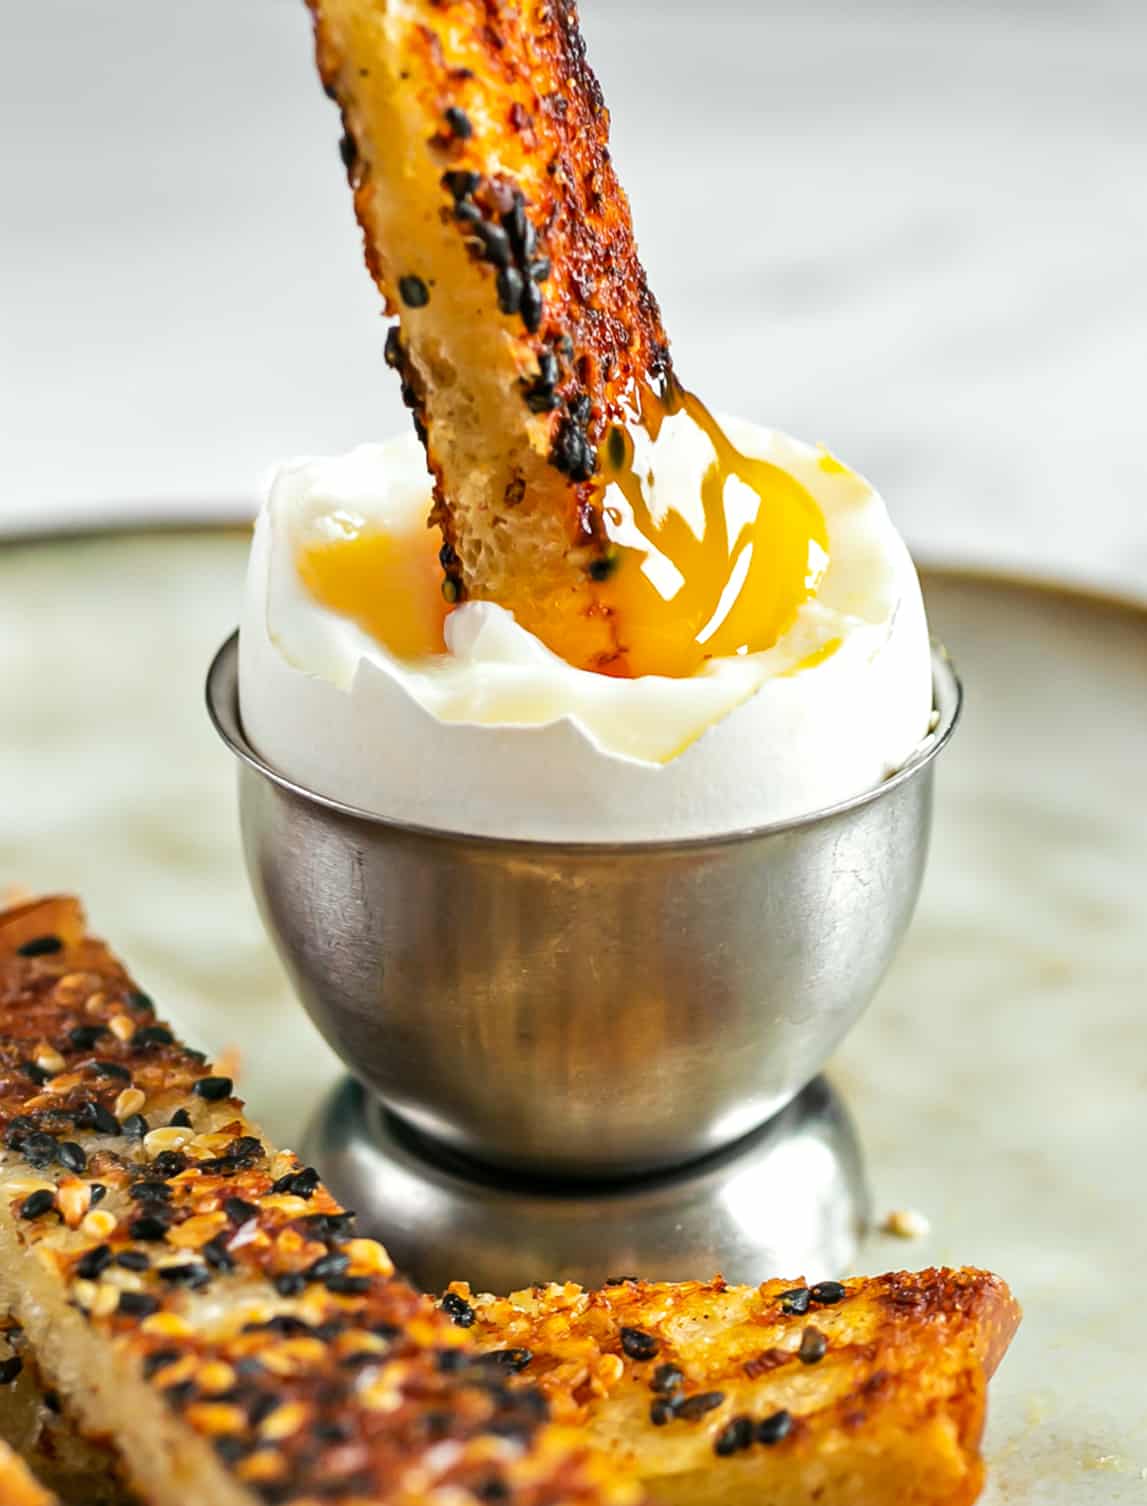 Dippy Eggs with Soldiers: How to Make It (British Breakfast Recipe)